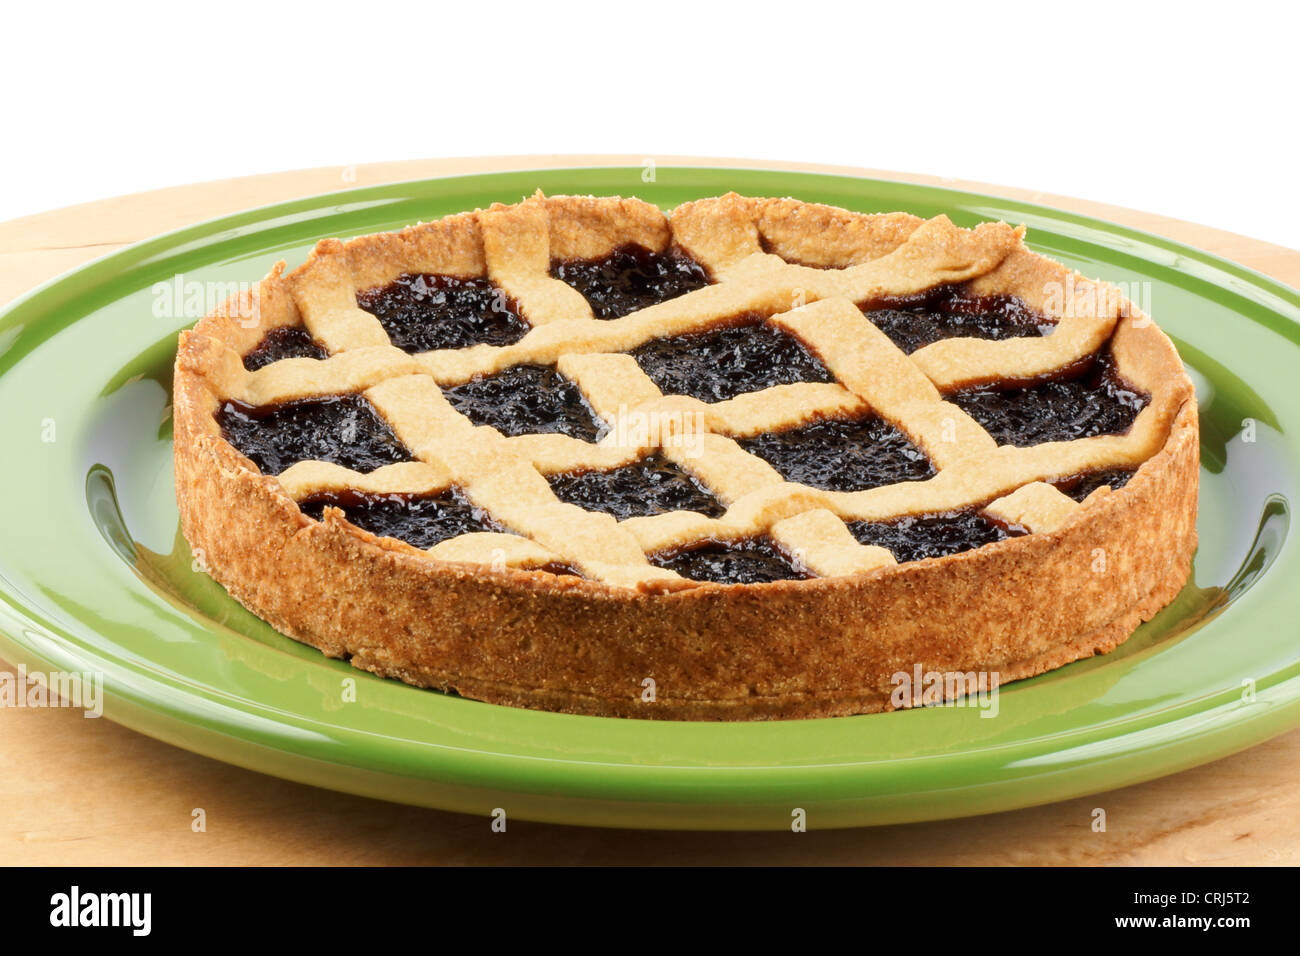 Homemade cherry jam tart on a green dish over a wooden background. With copy space. Stock Photo